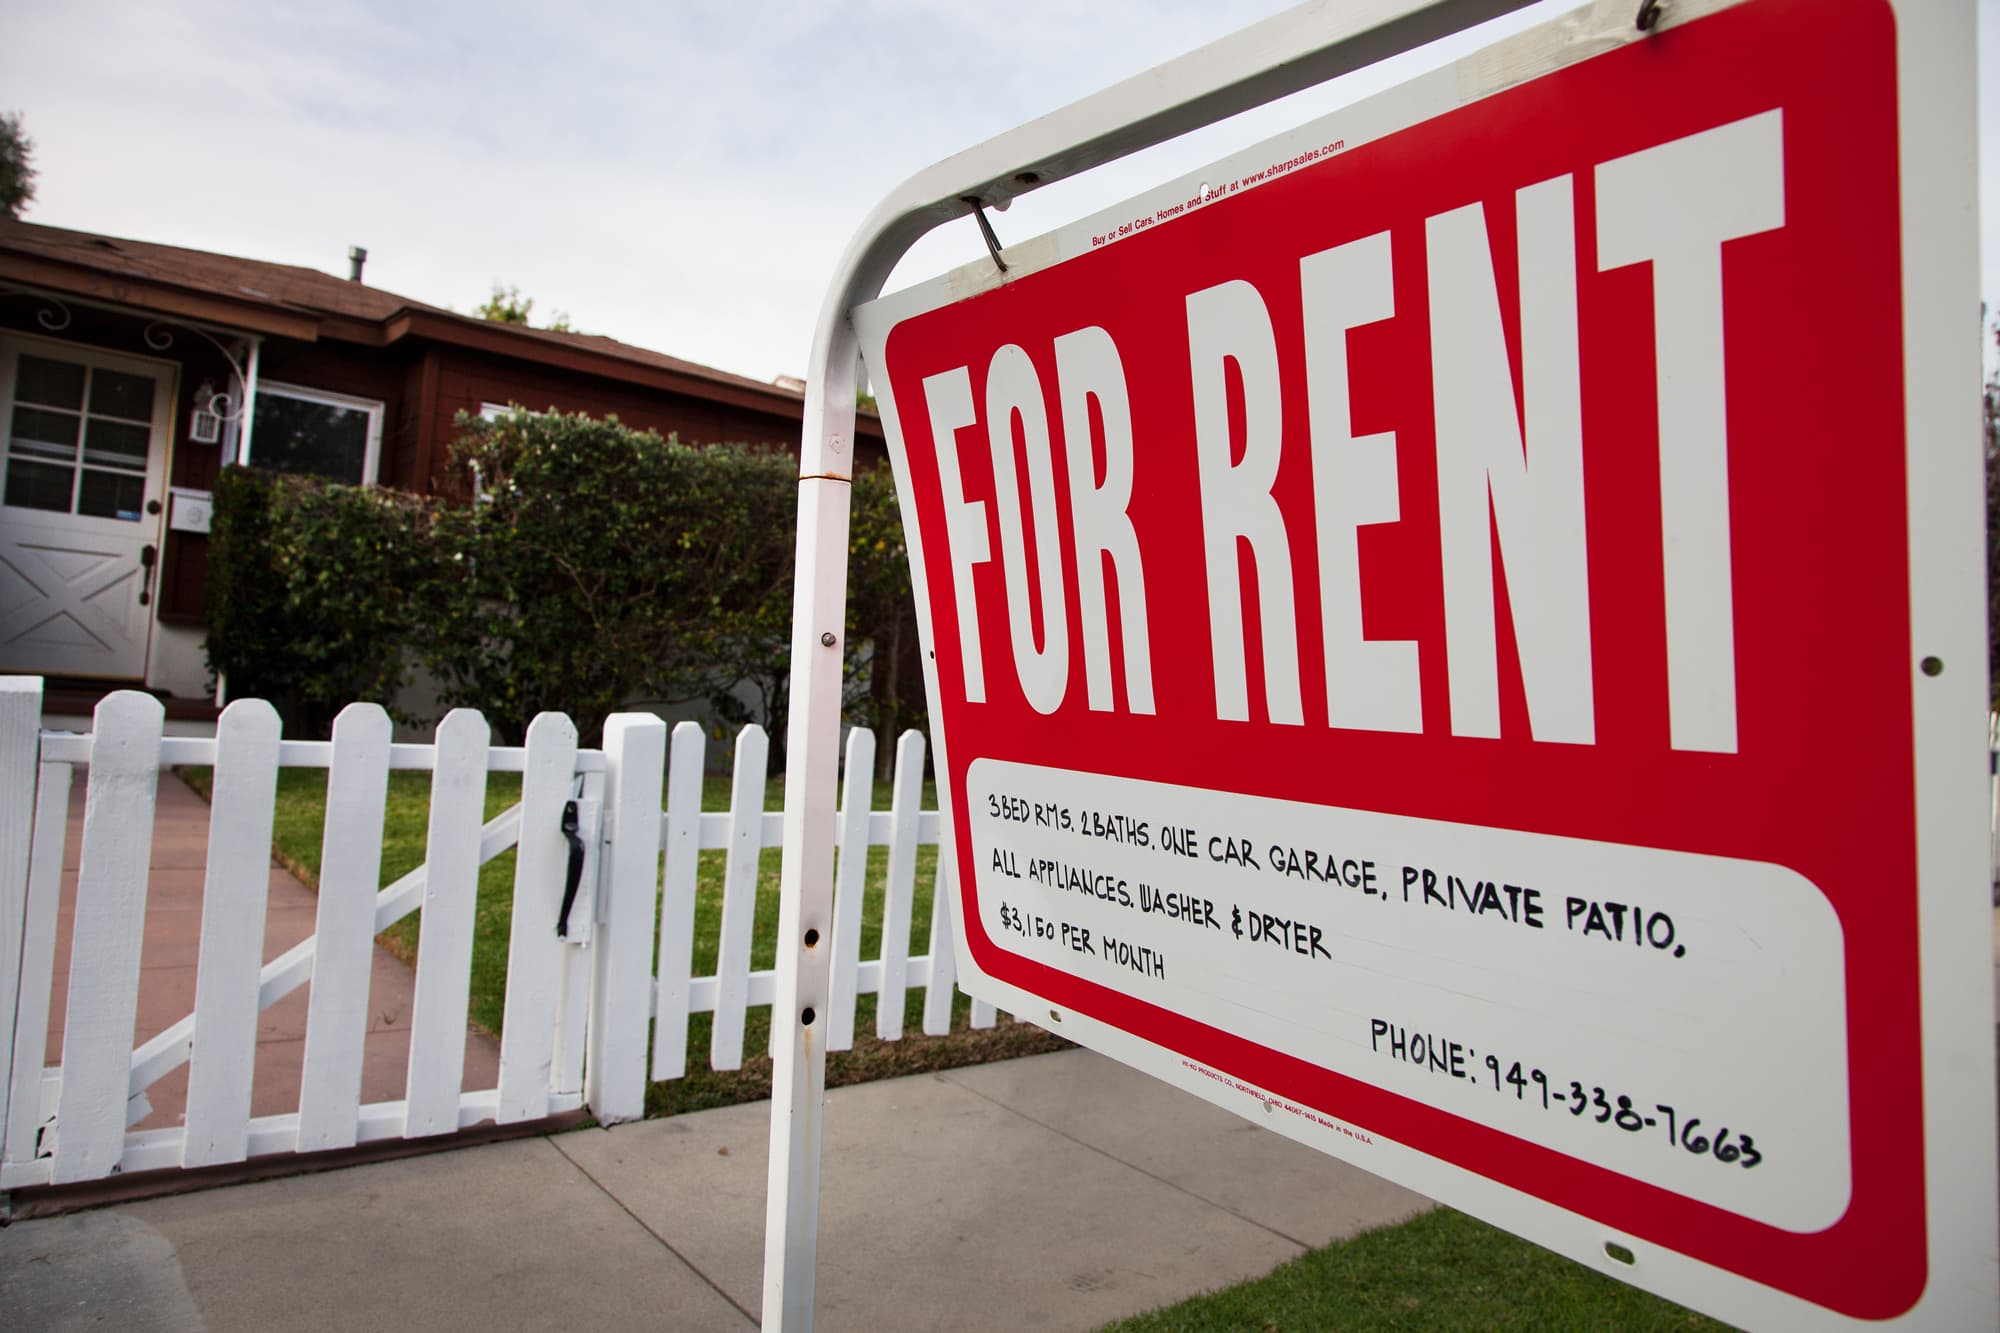 Single-family rent prices are surging at a record rate, led by homes in Sun Belt..